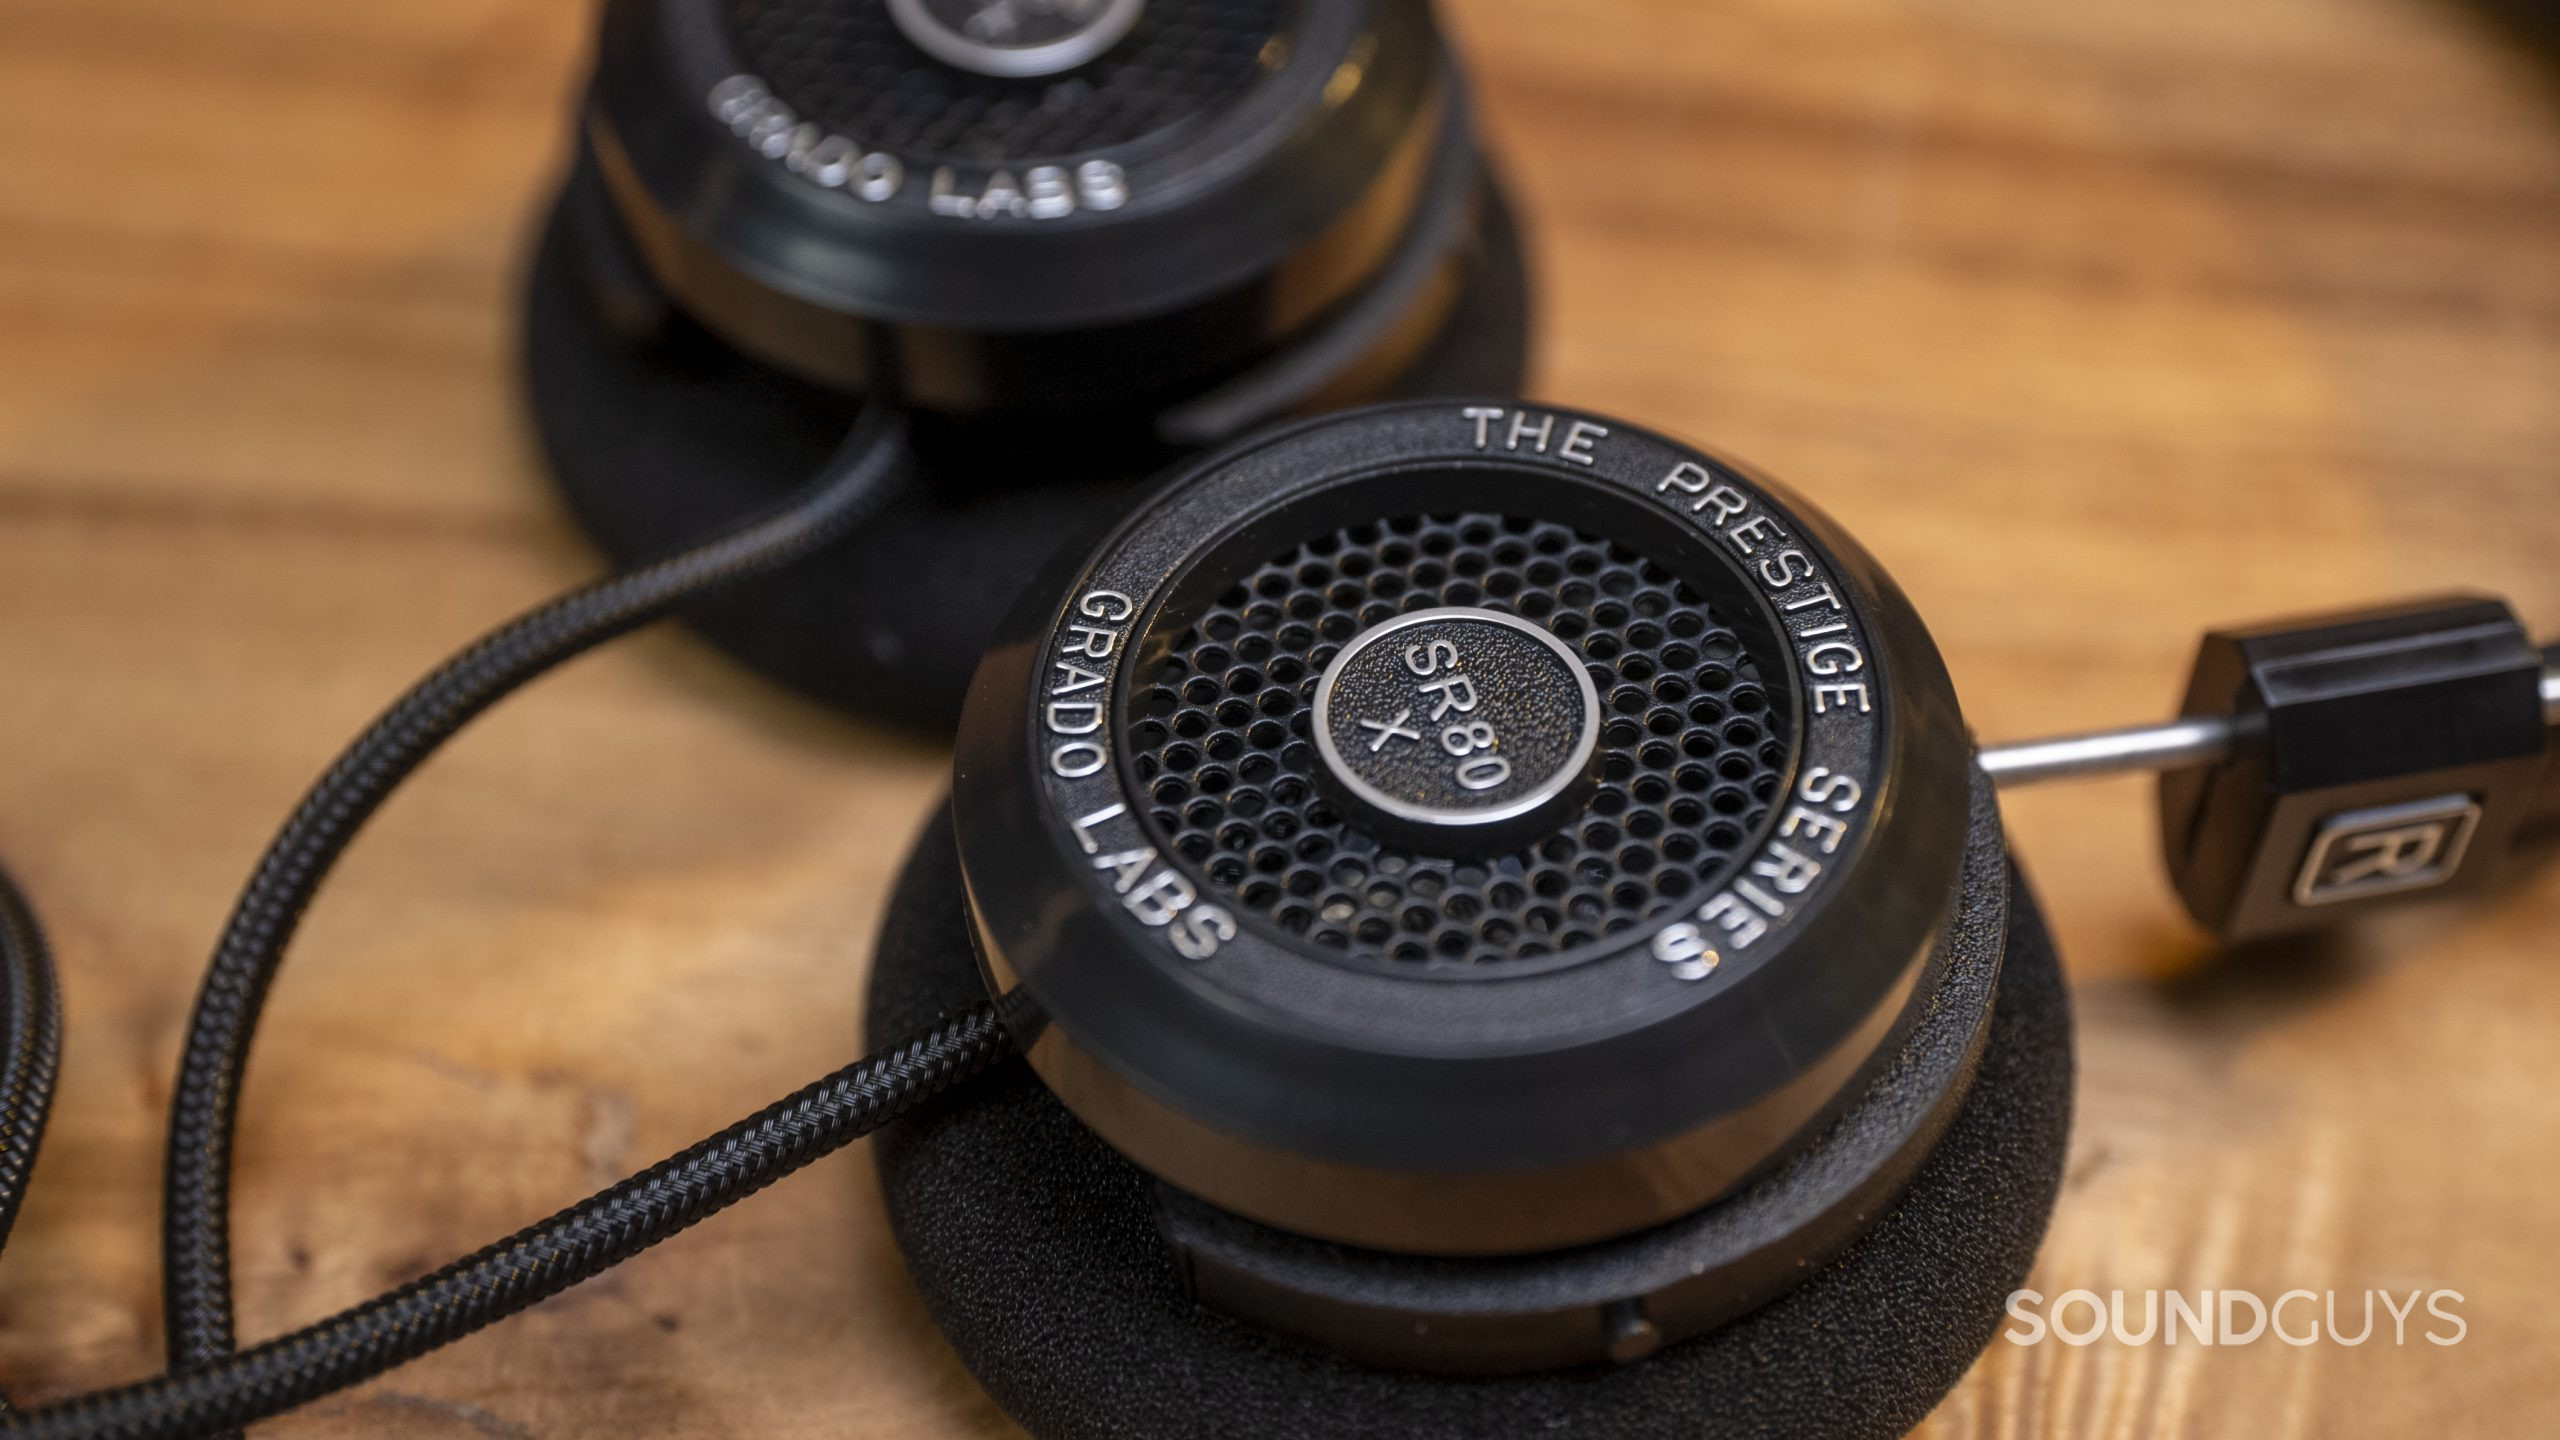 A close up of the Grado Labs SR80x right ear cup on a wood surface.